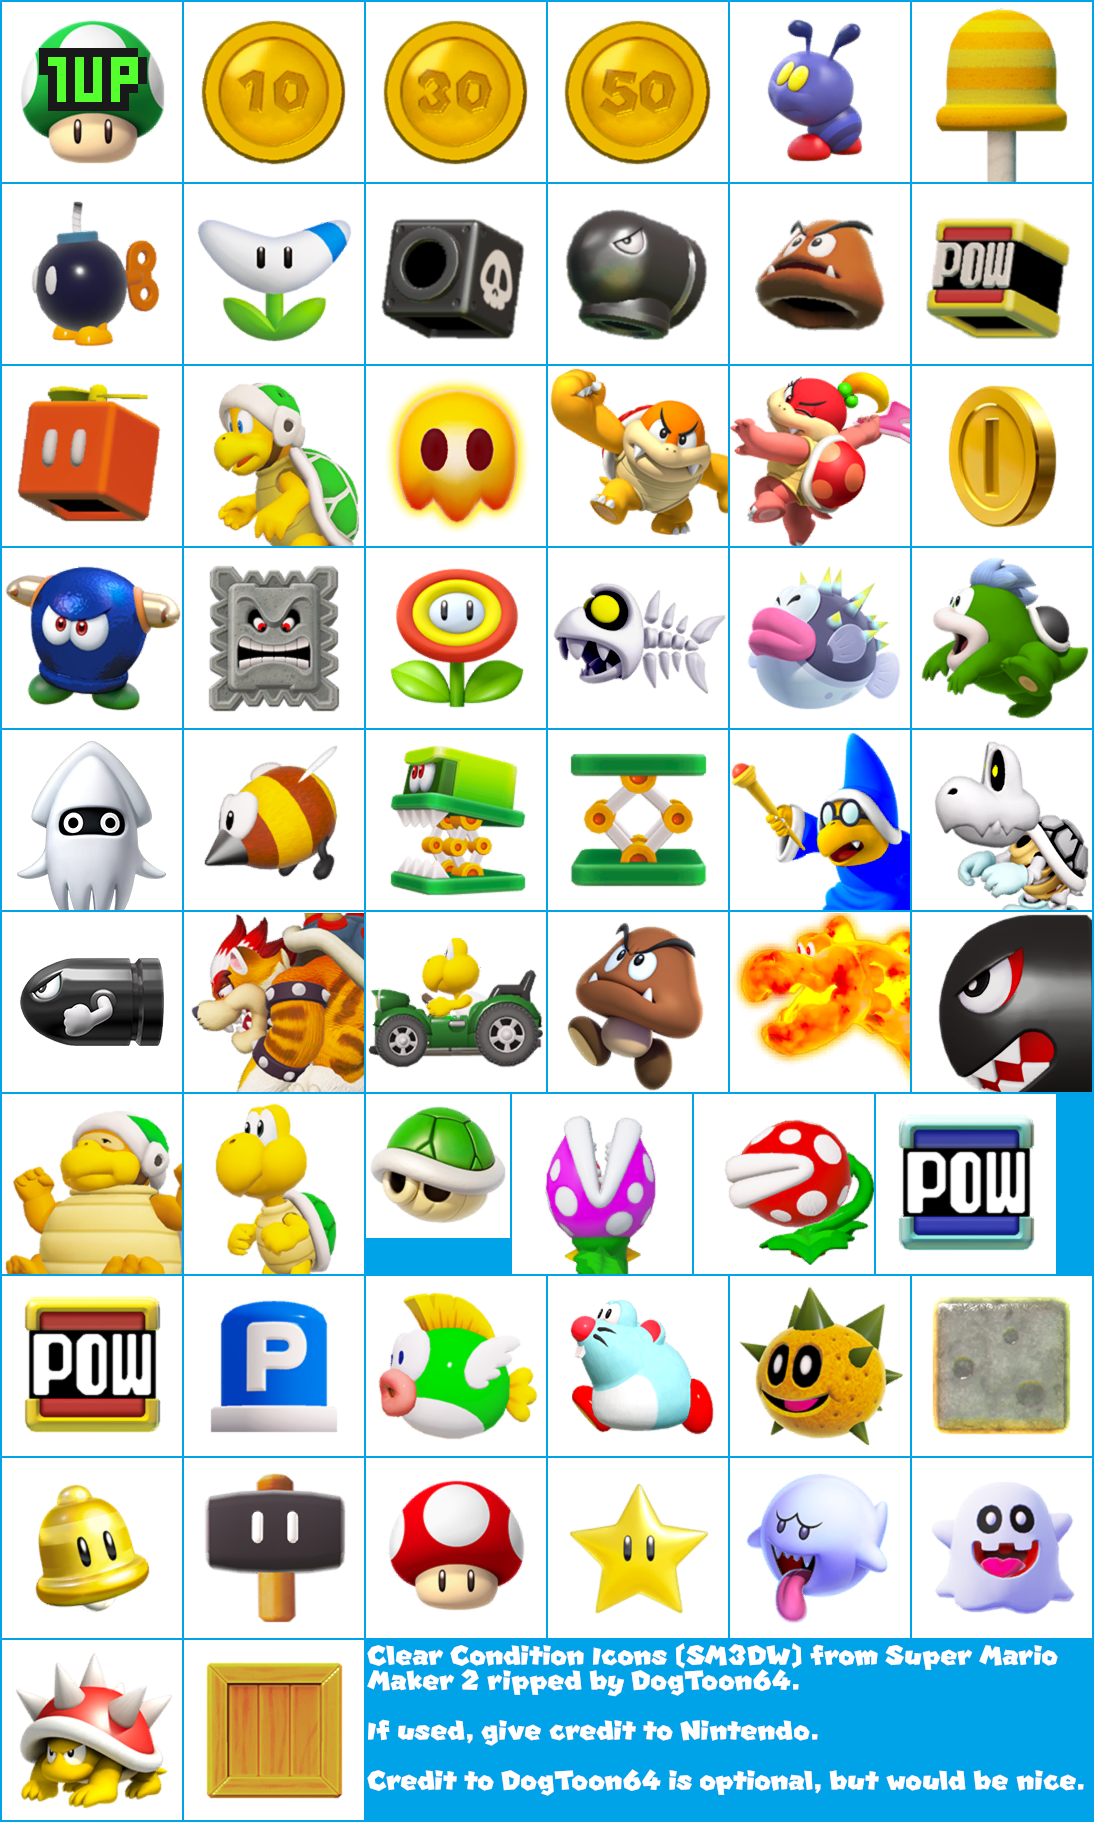 Super Mario Maker 2 - Clear Condition Icons (SM3DW)